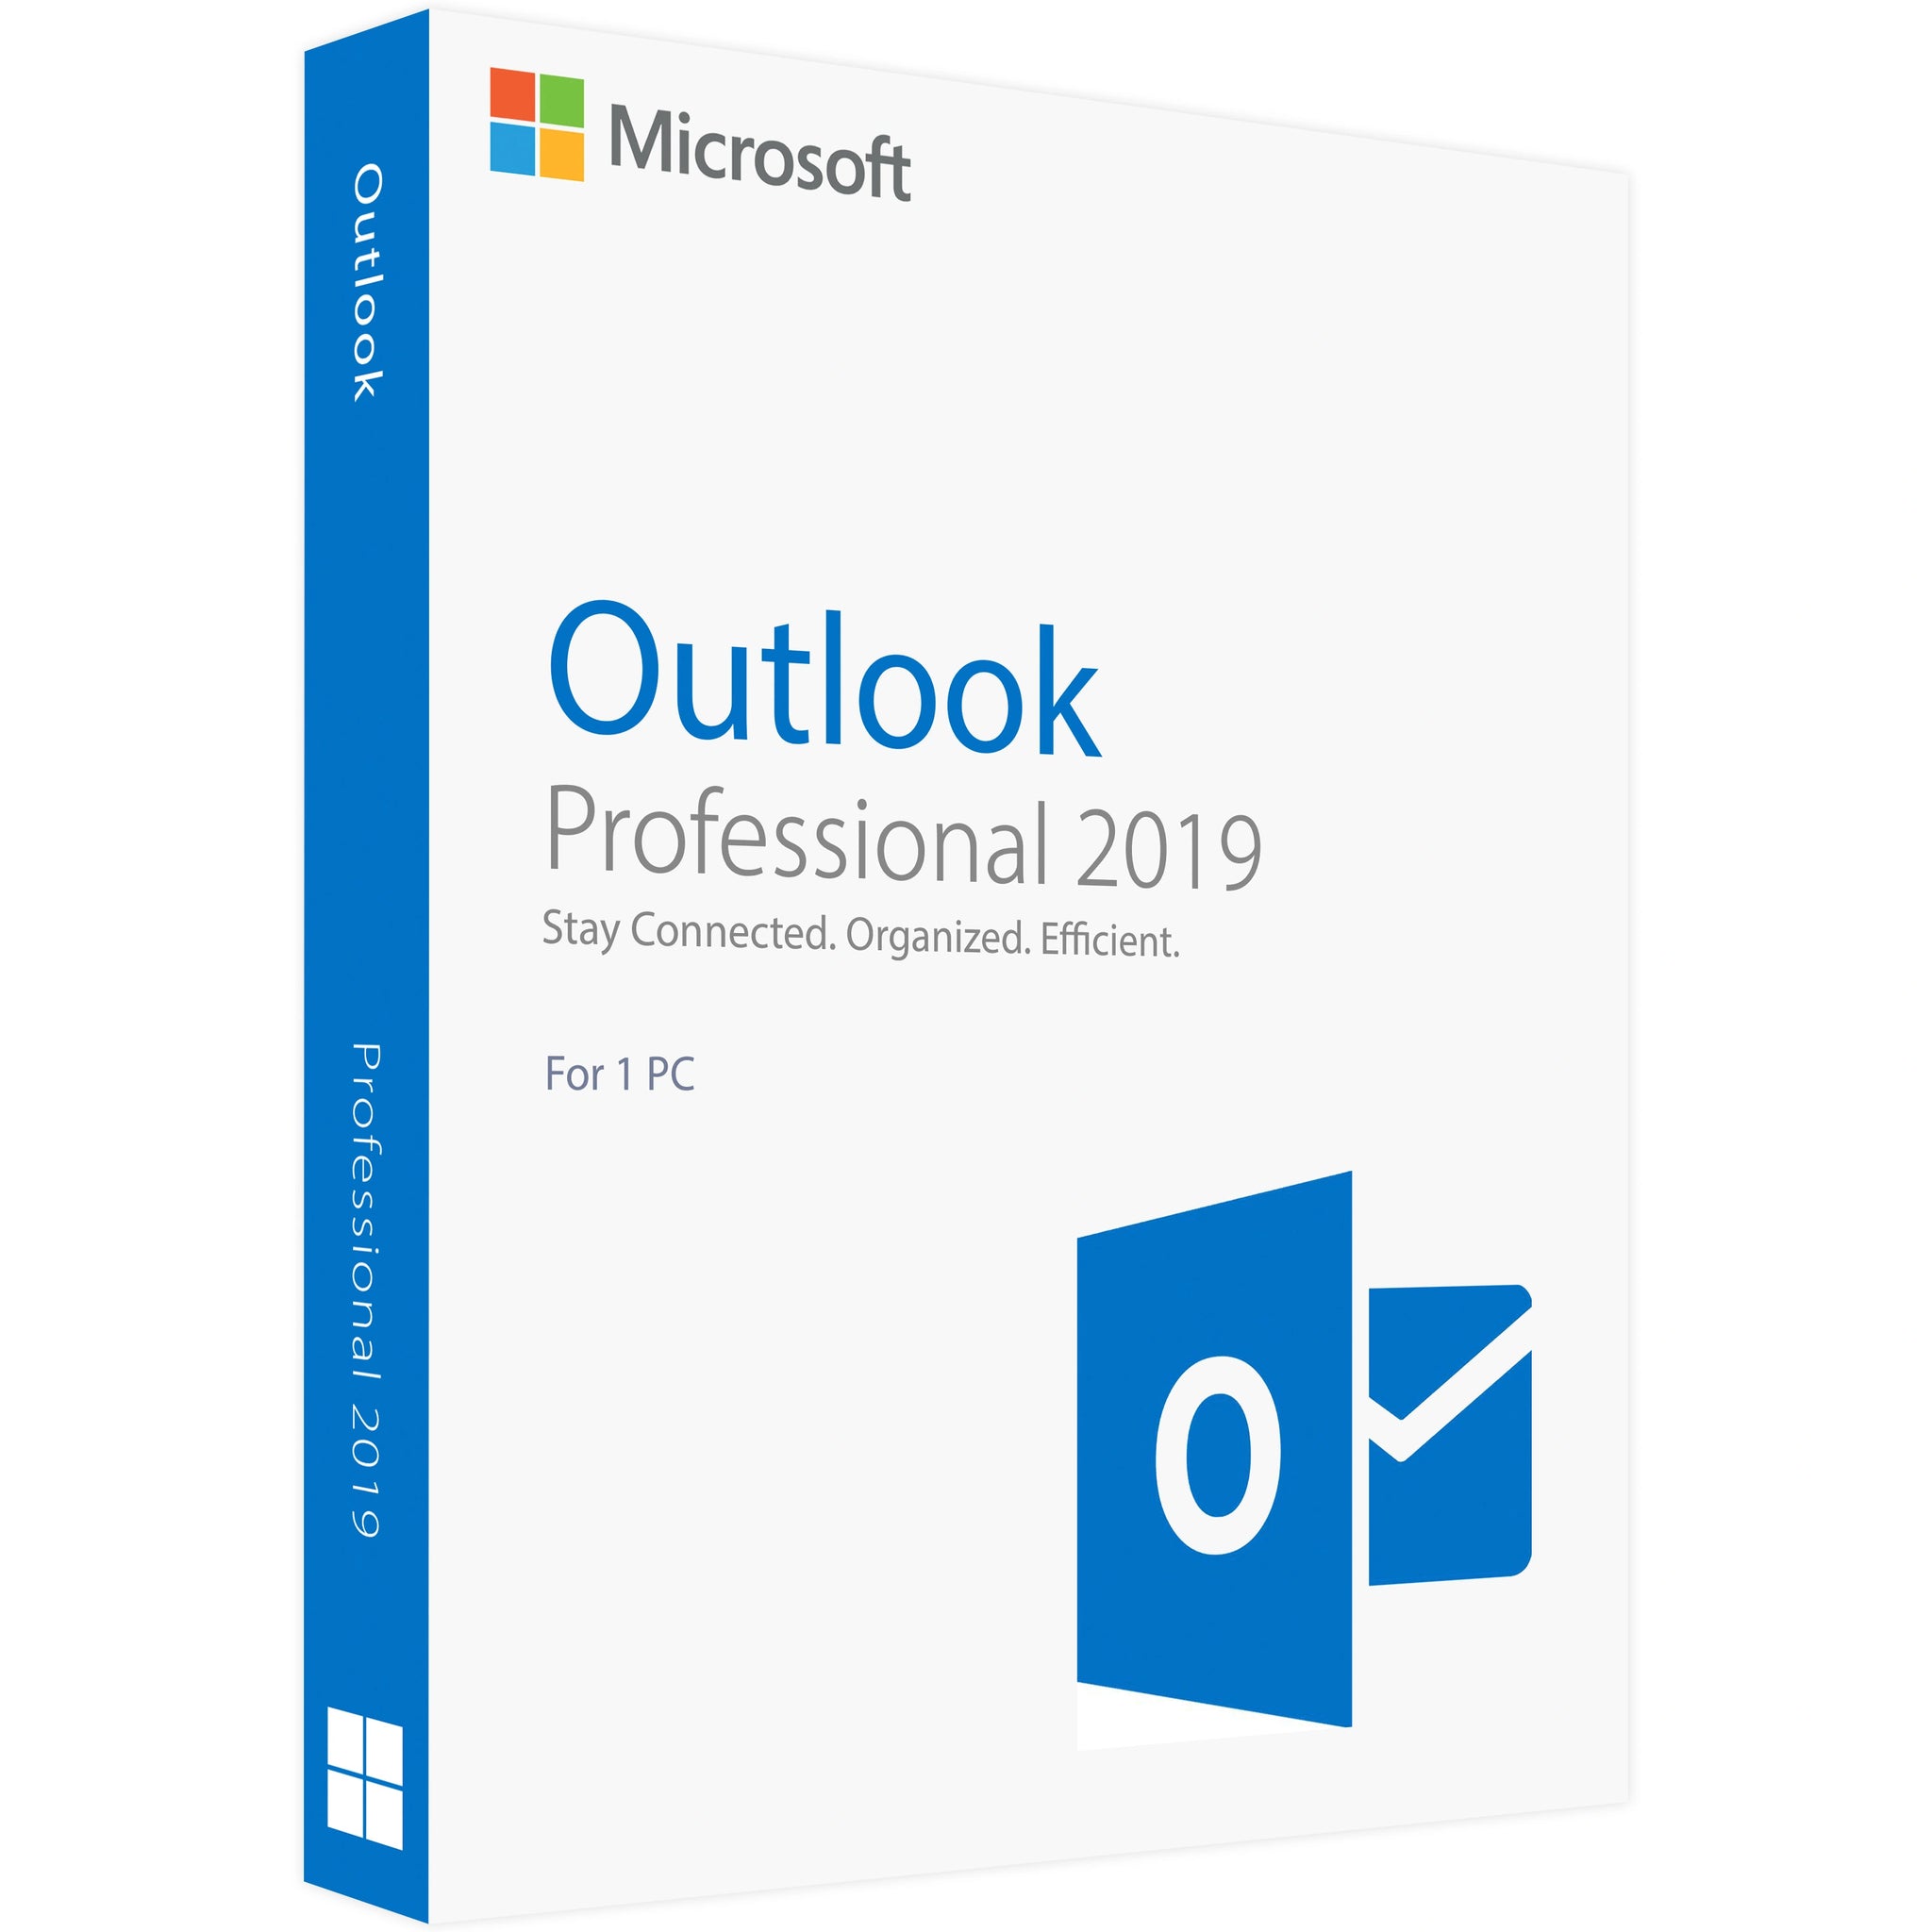 Microsoft Outlook 2019 Professional- Lifetime License Key for 1 PC